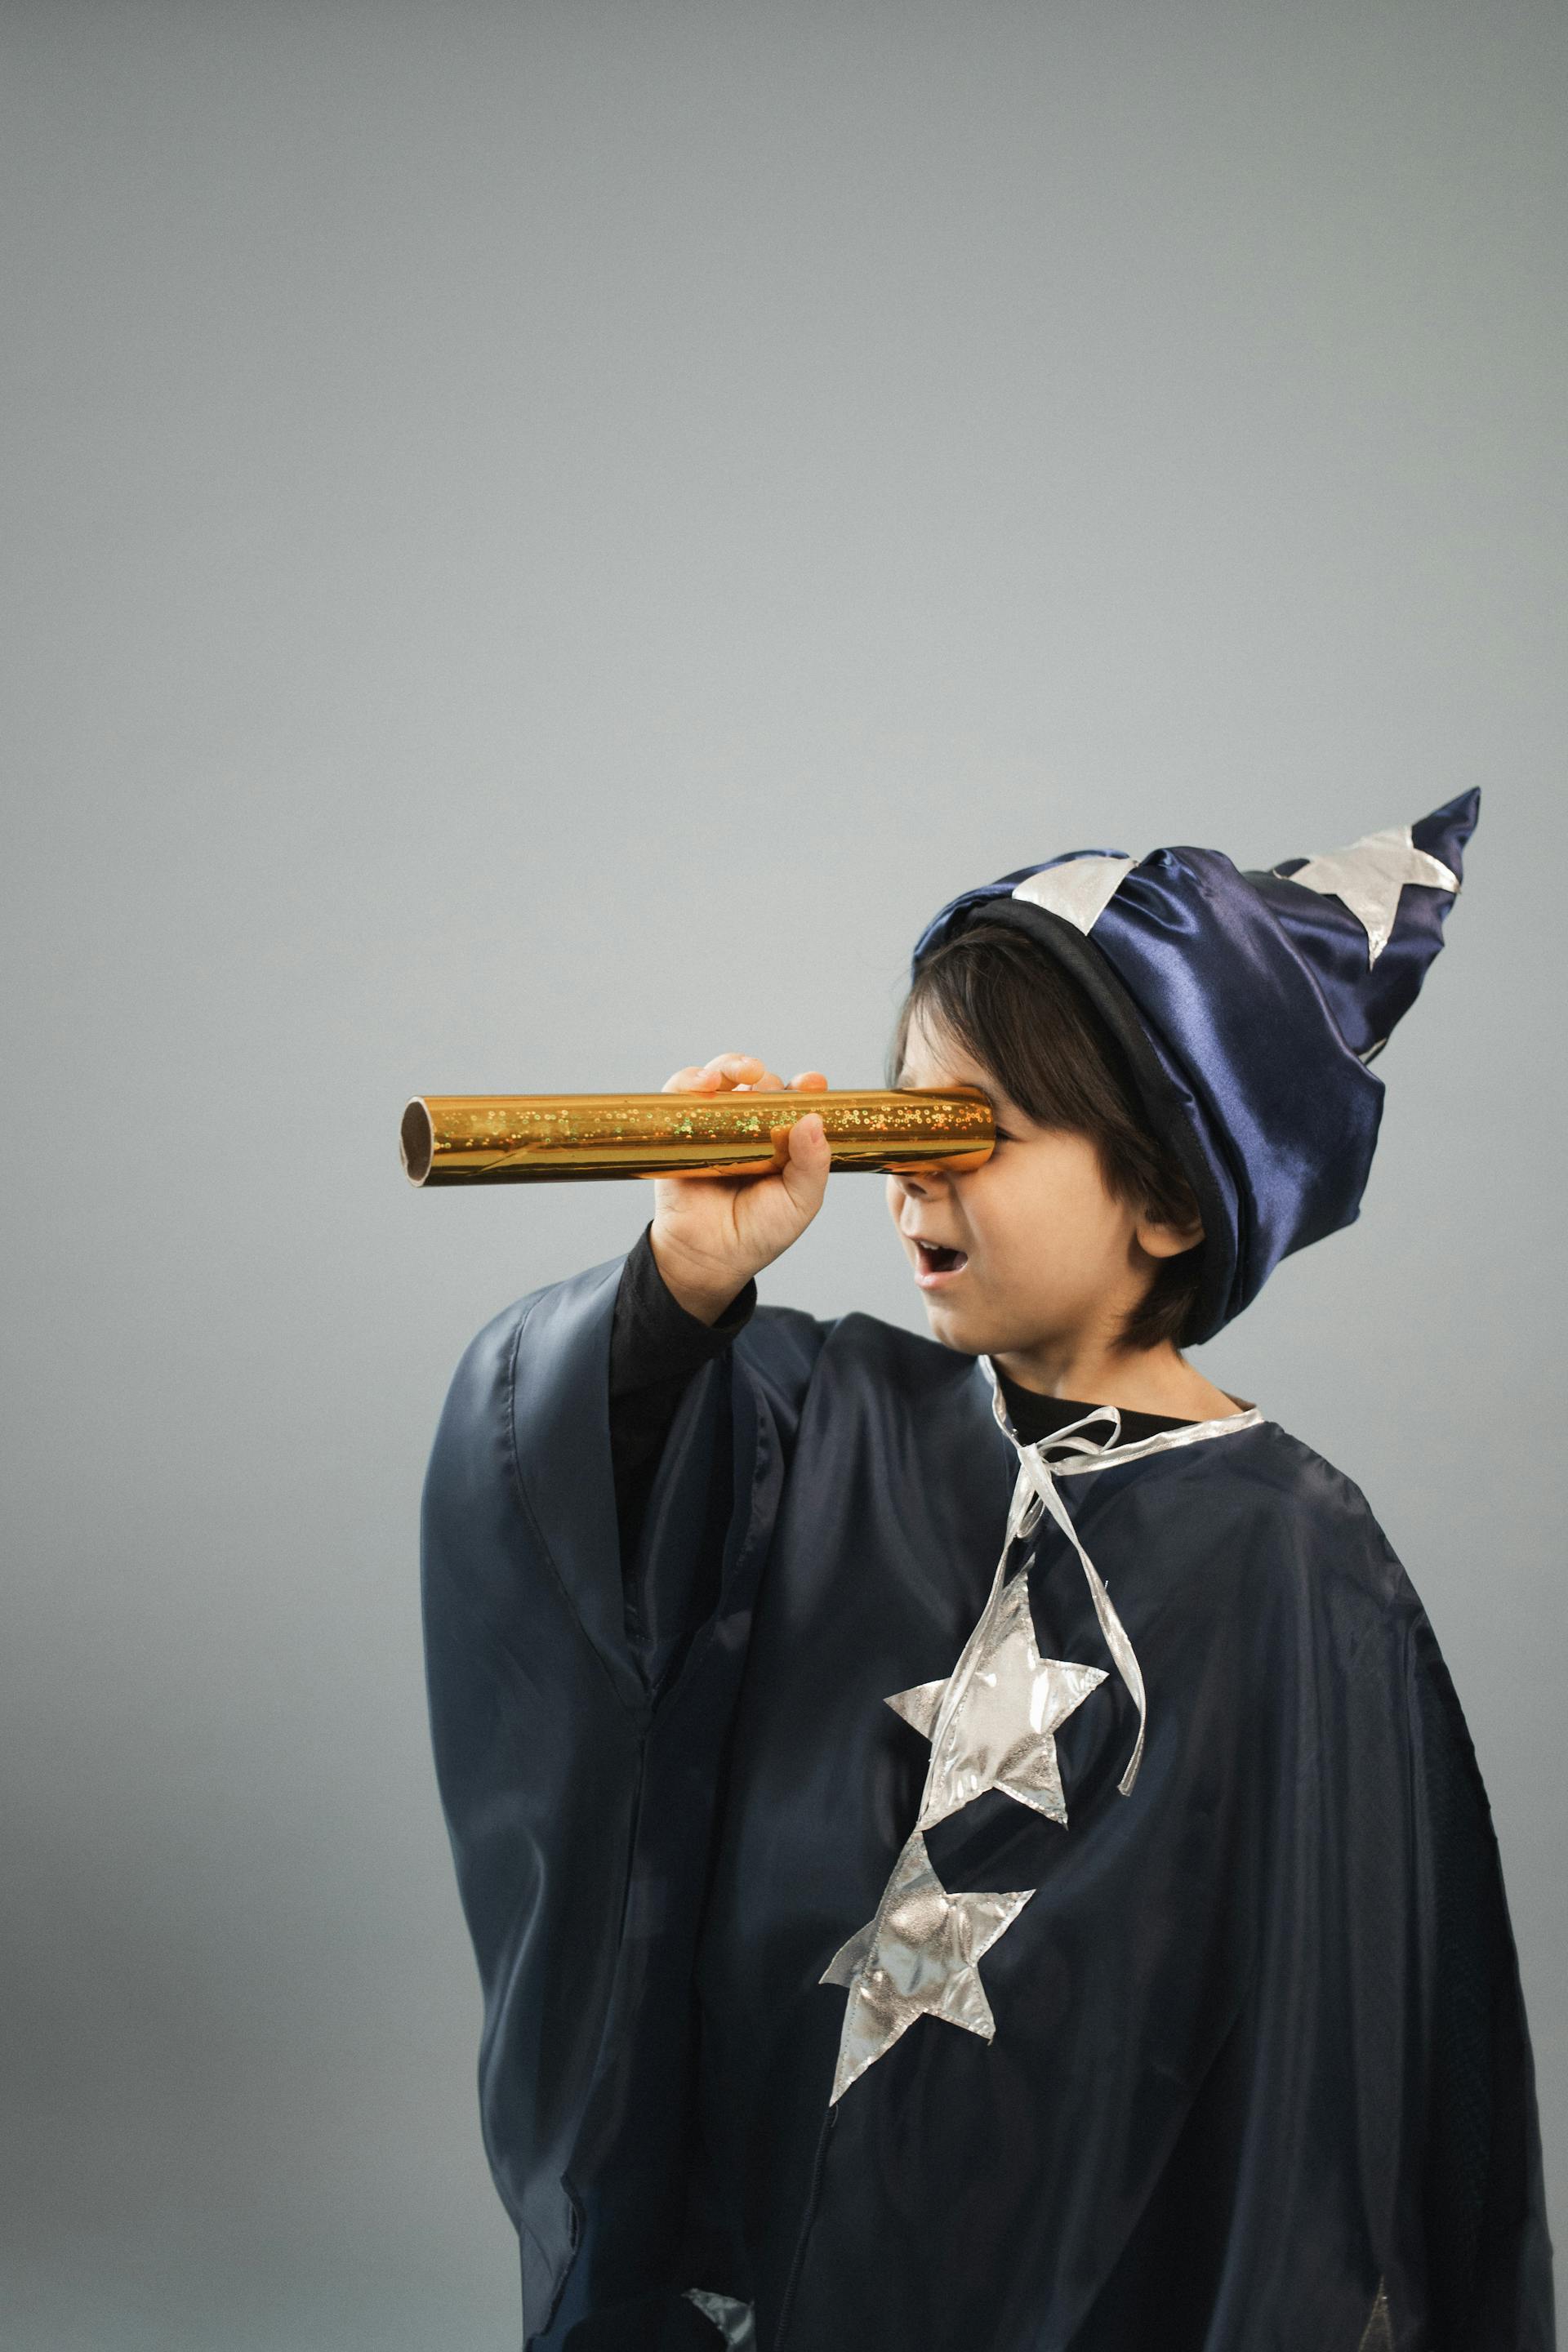 A child wearing a costume | Source: Pexels